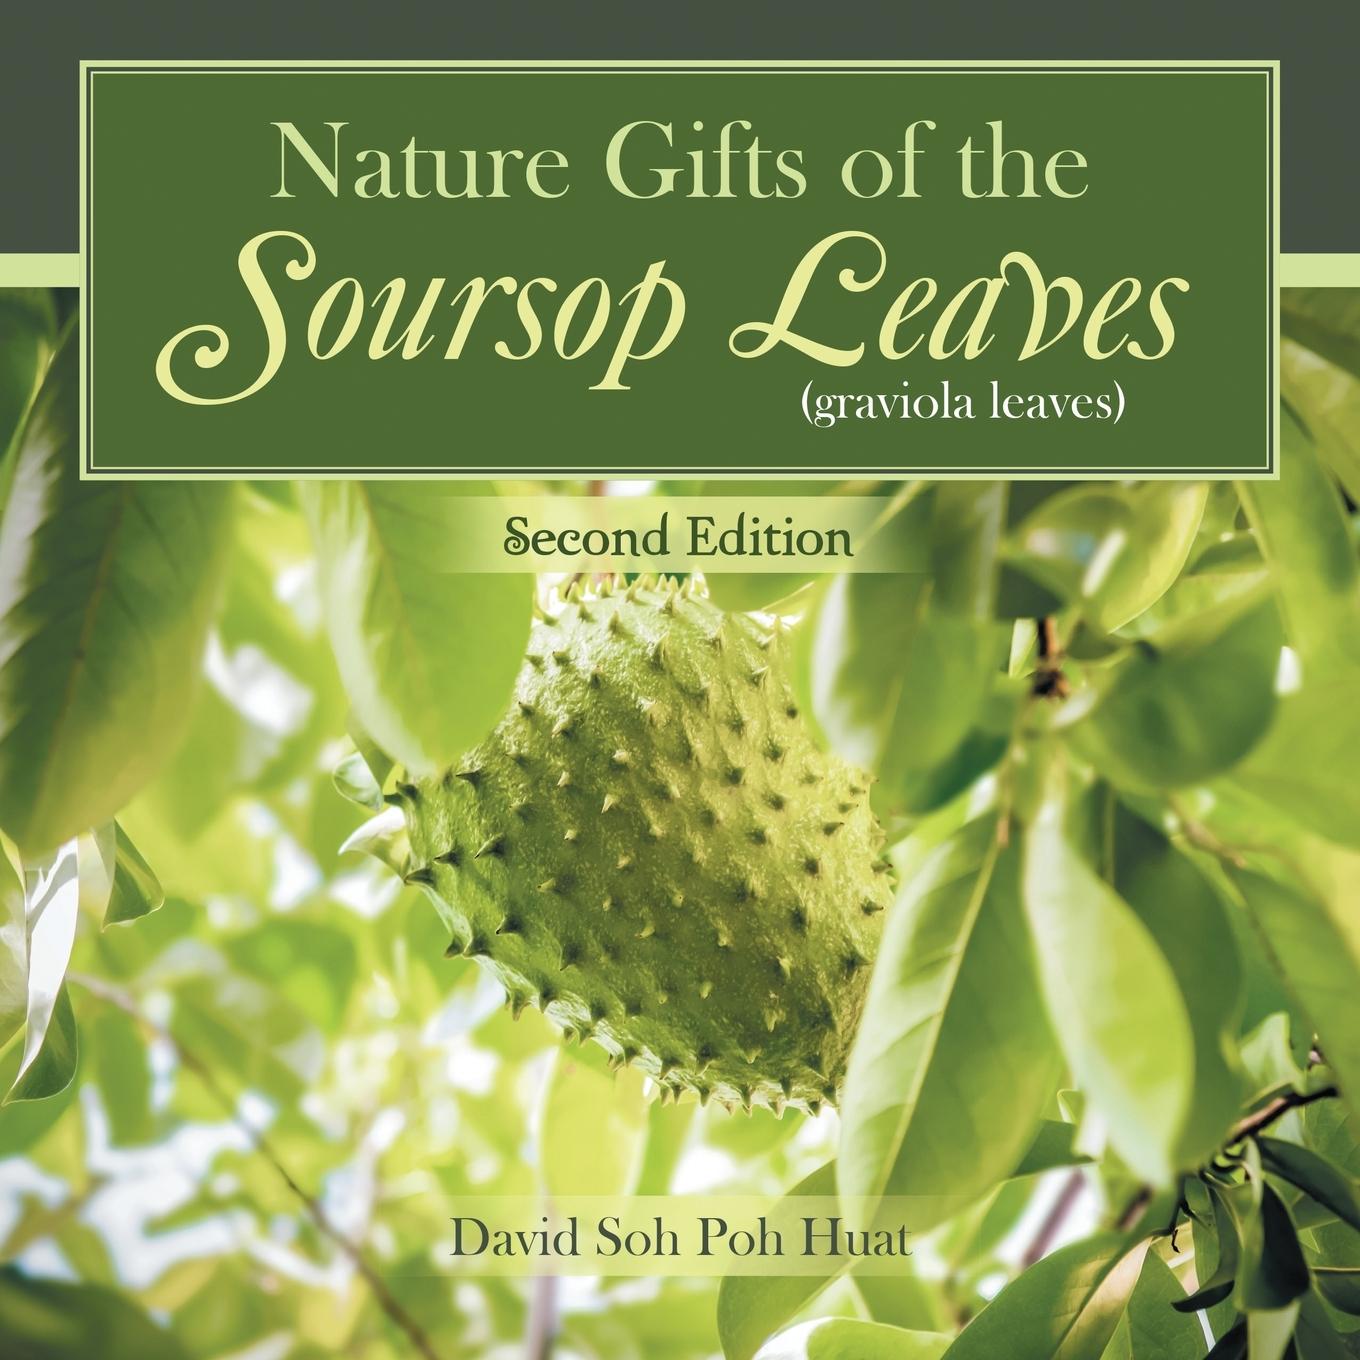 Könyv Nature Gifts of the Soursop leaves (graviola leaves) 